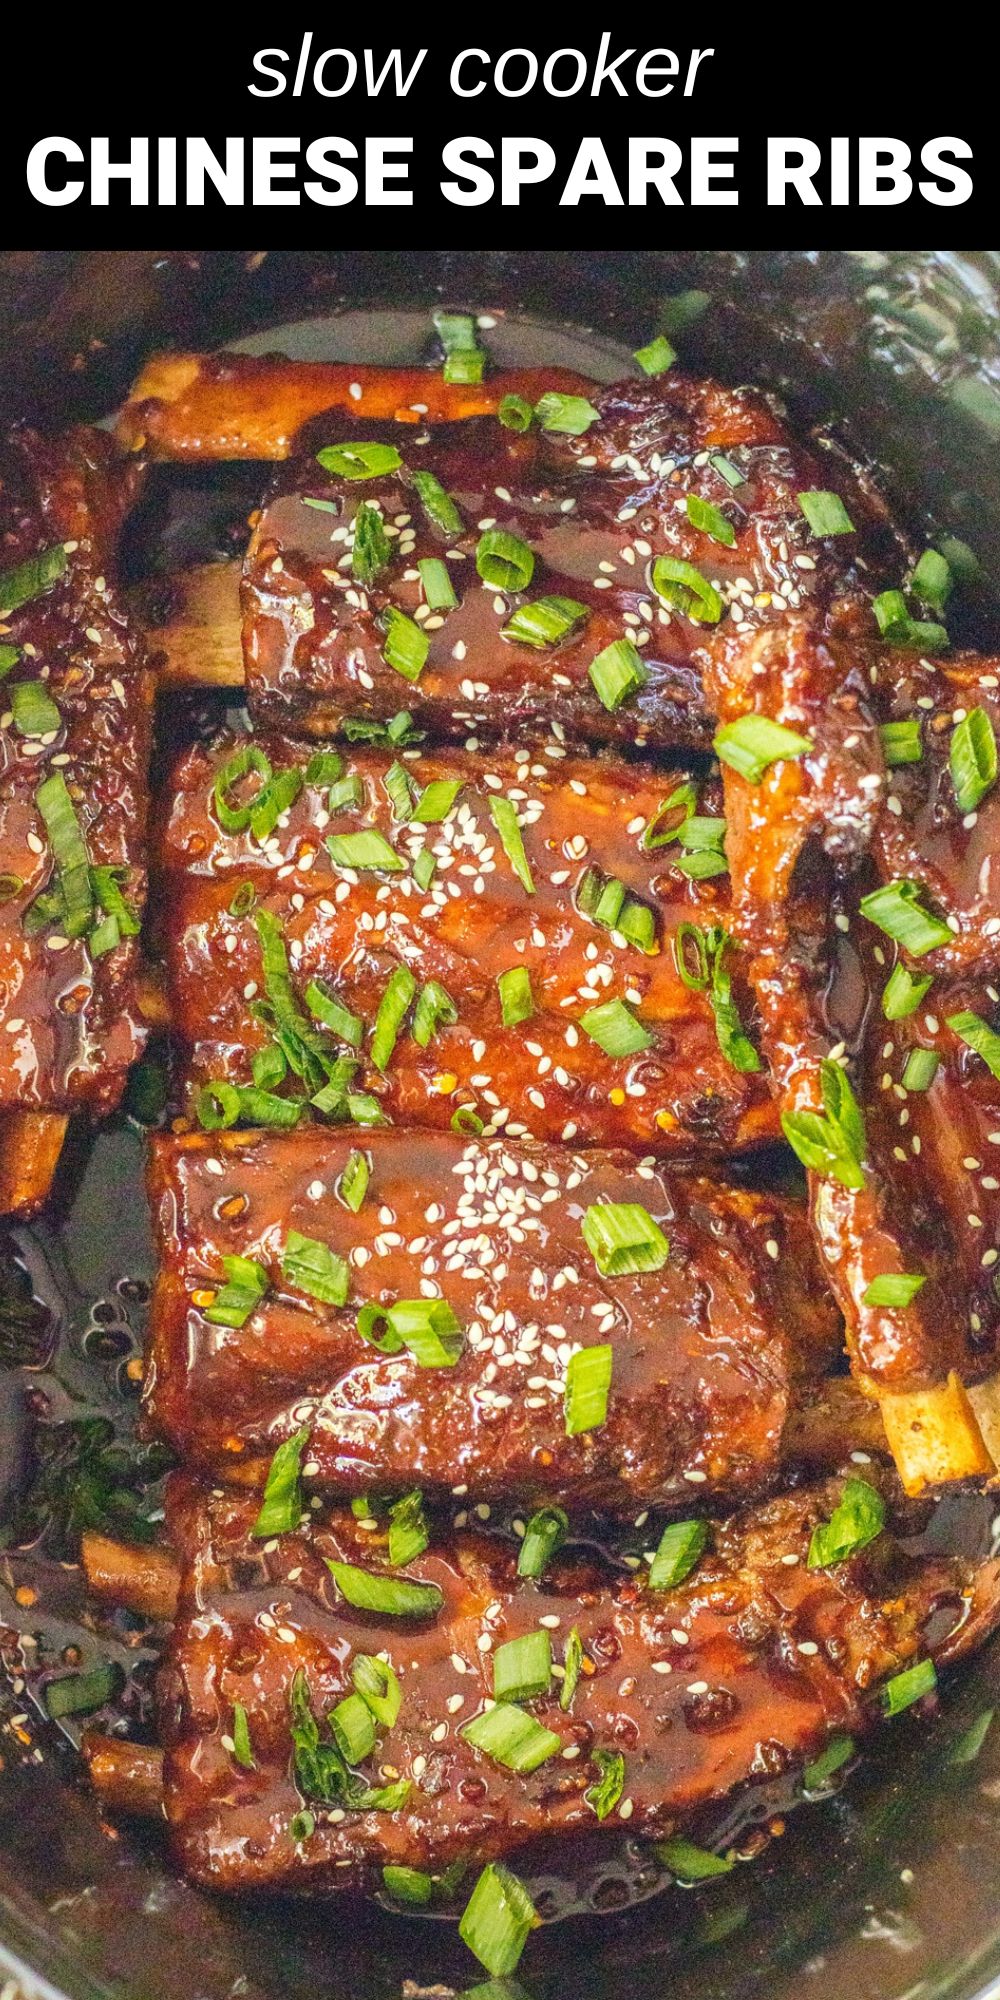 These Chinese-style Slow Cooker Spare Ribs feature a sweet and sticky glaze made with honey, hoisin sauce, and the perfect combination of flavorful seasonings. The ribs are cooked low and slow, with very little effort, until the meat is falling off the bone tender. 